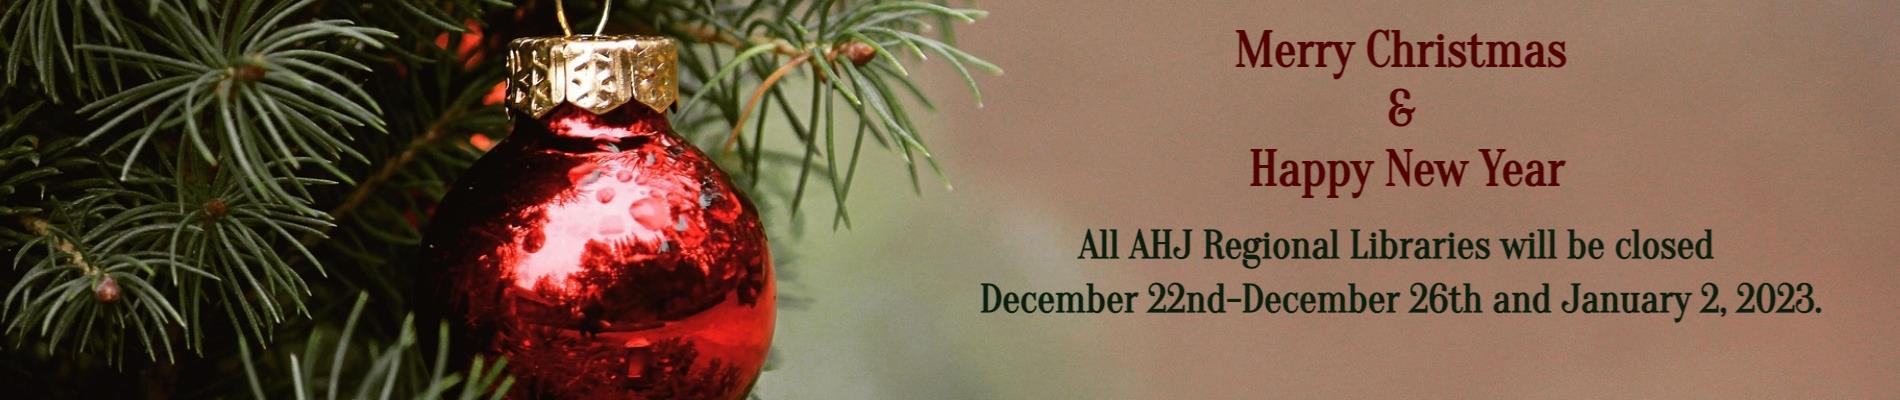 Merry Christmas & Happy New Year.  All AHJ Regional Libraries will be closed December 22-December 26th and January 2, 2023.